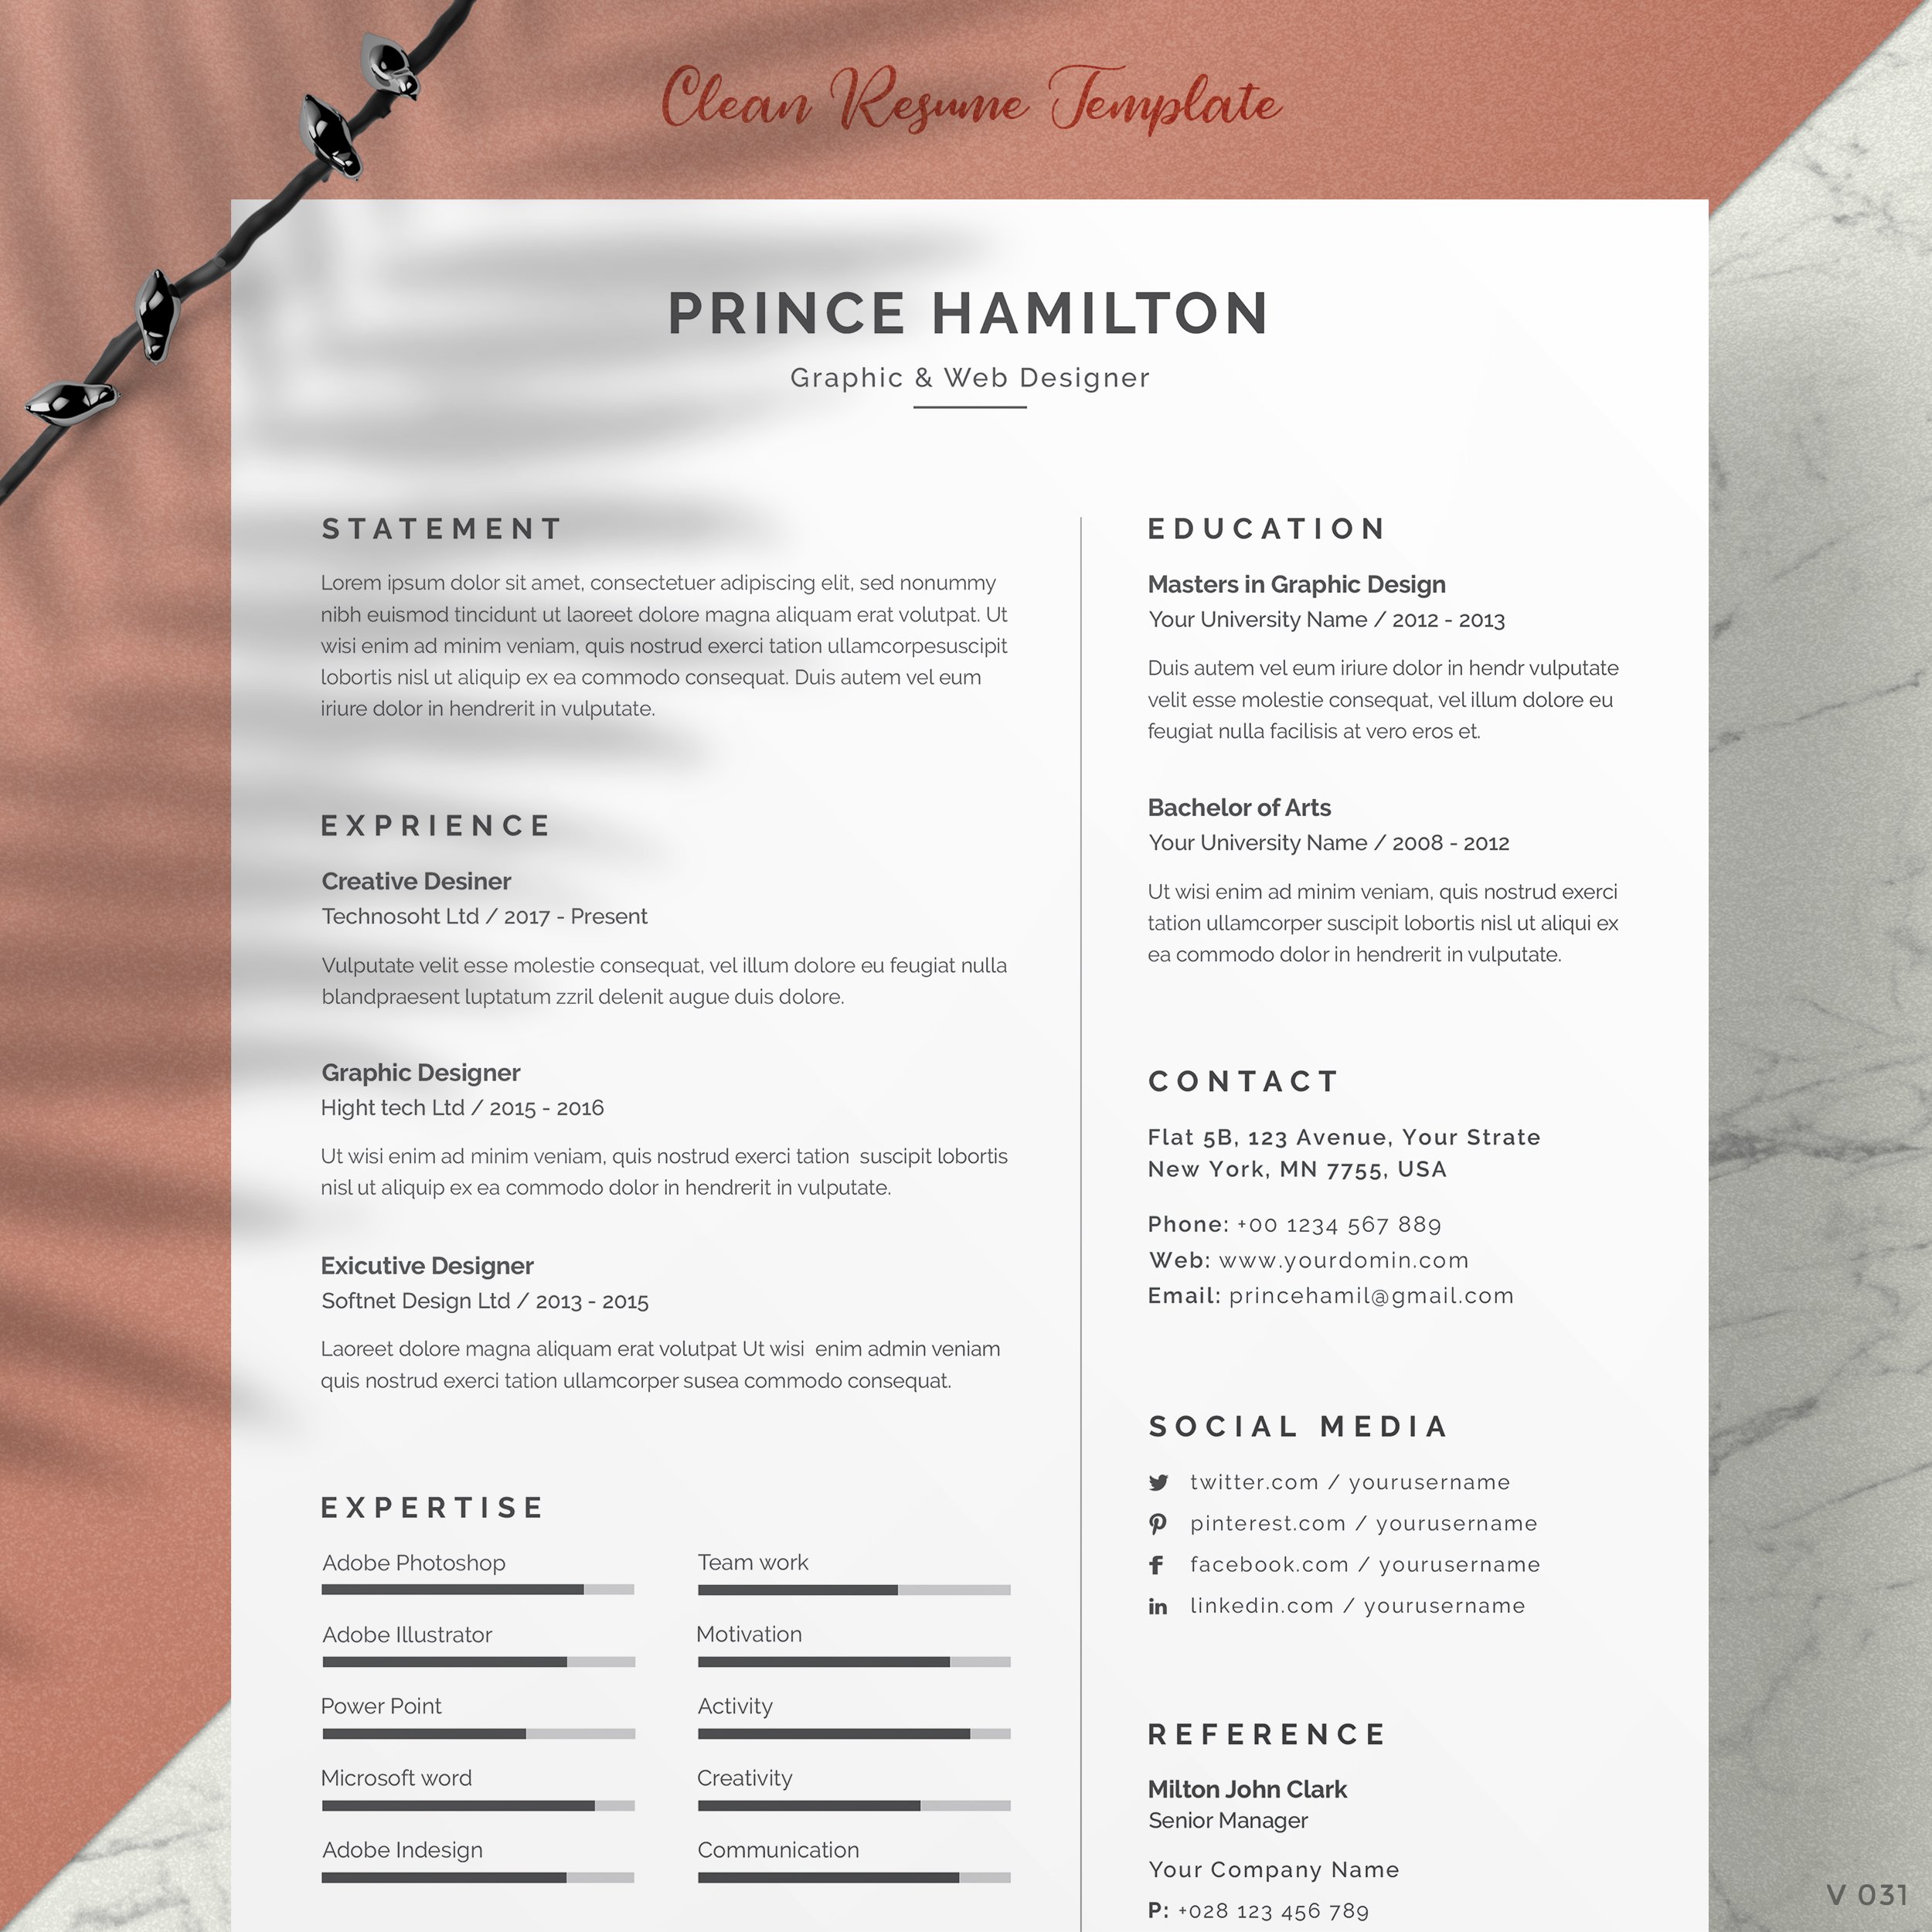 Word Resume/CV preview image.